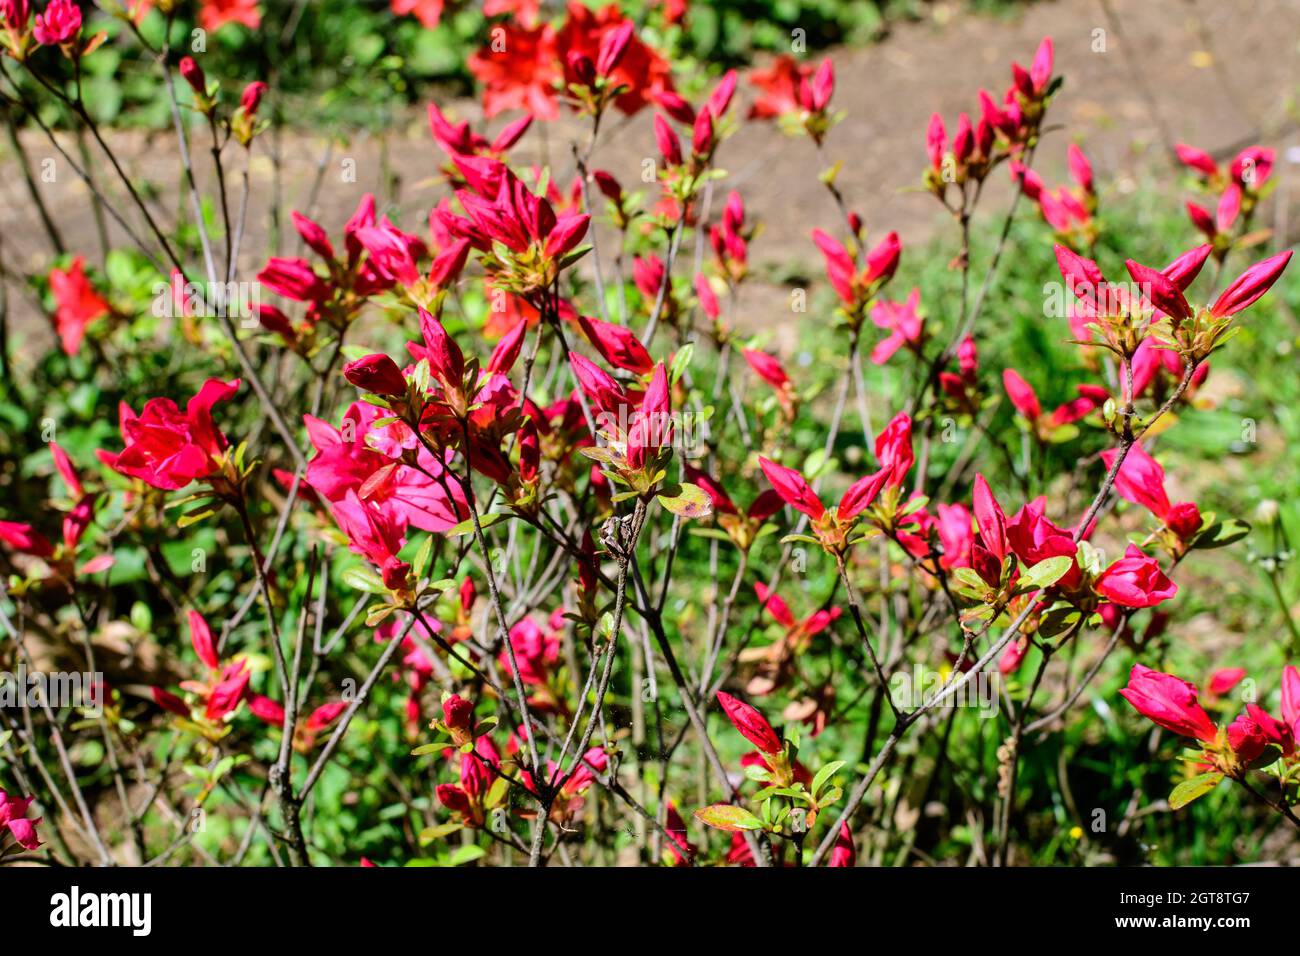 Bush of delicate vivid red flowers of azalea or Rhododendron plant in a sunny spring Japanese garden, beautiful outdoor floral background photographed Stock Photo